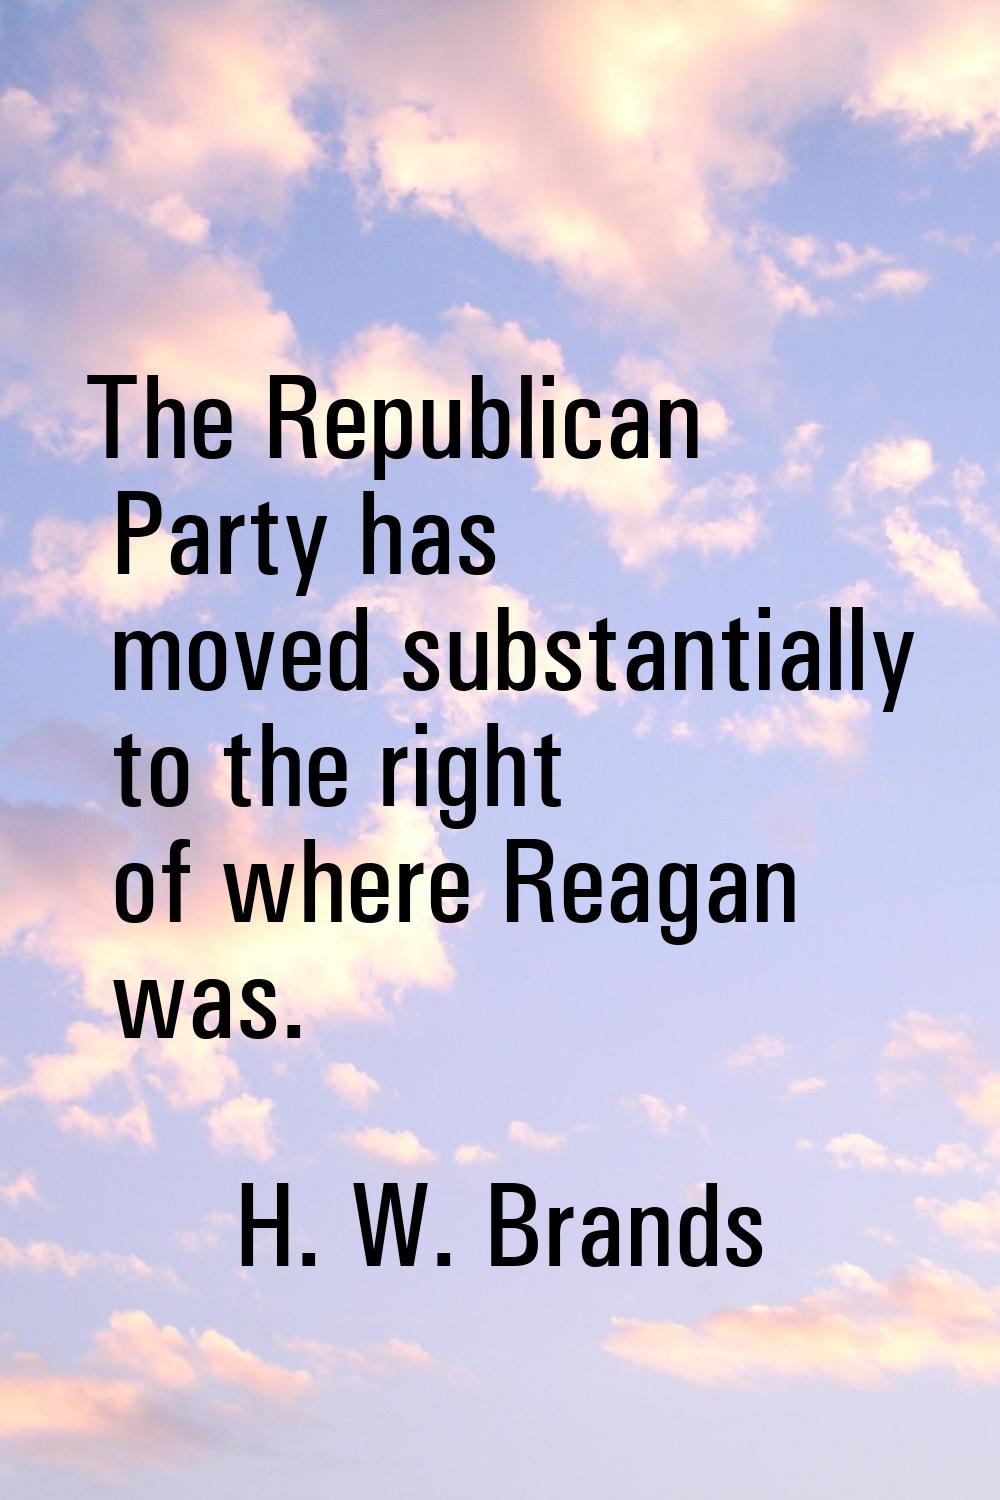 The Republican Party has moved substantially to the right of where Reagan was.